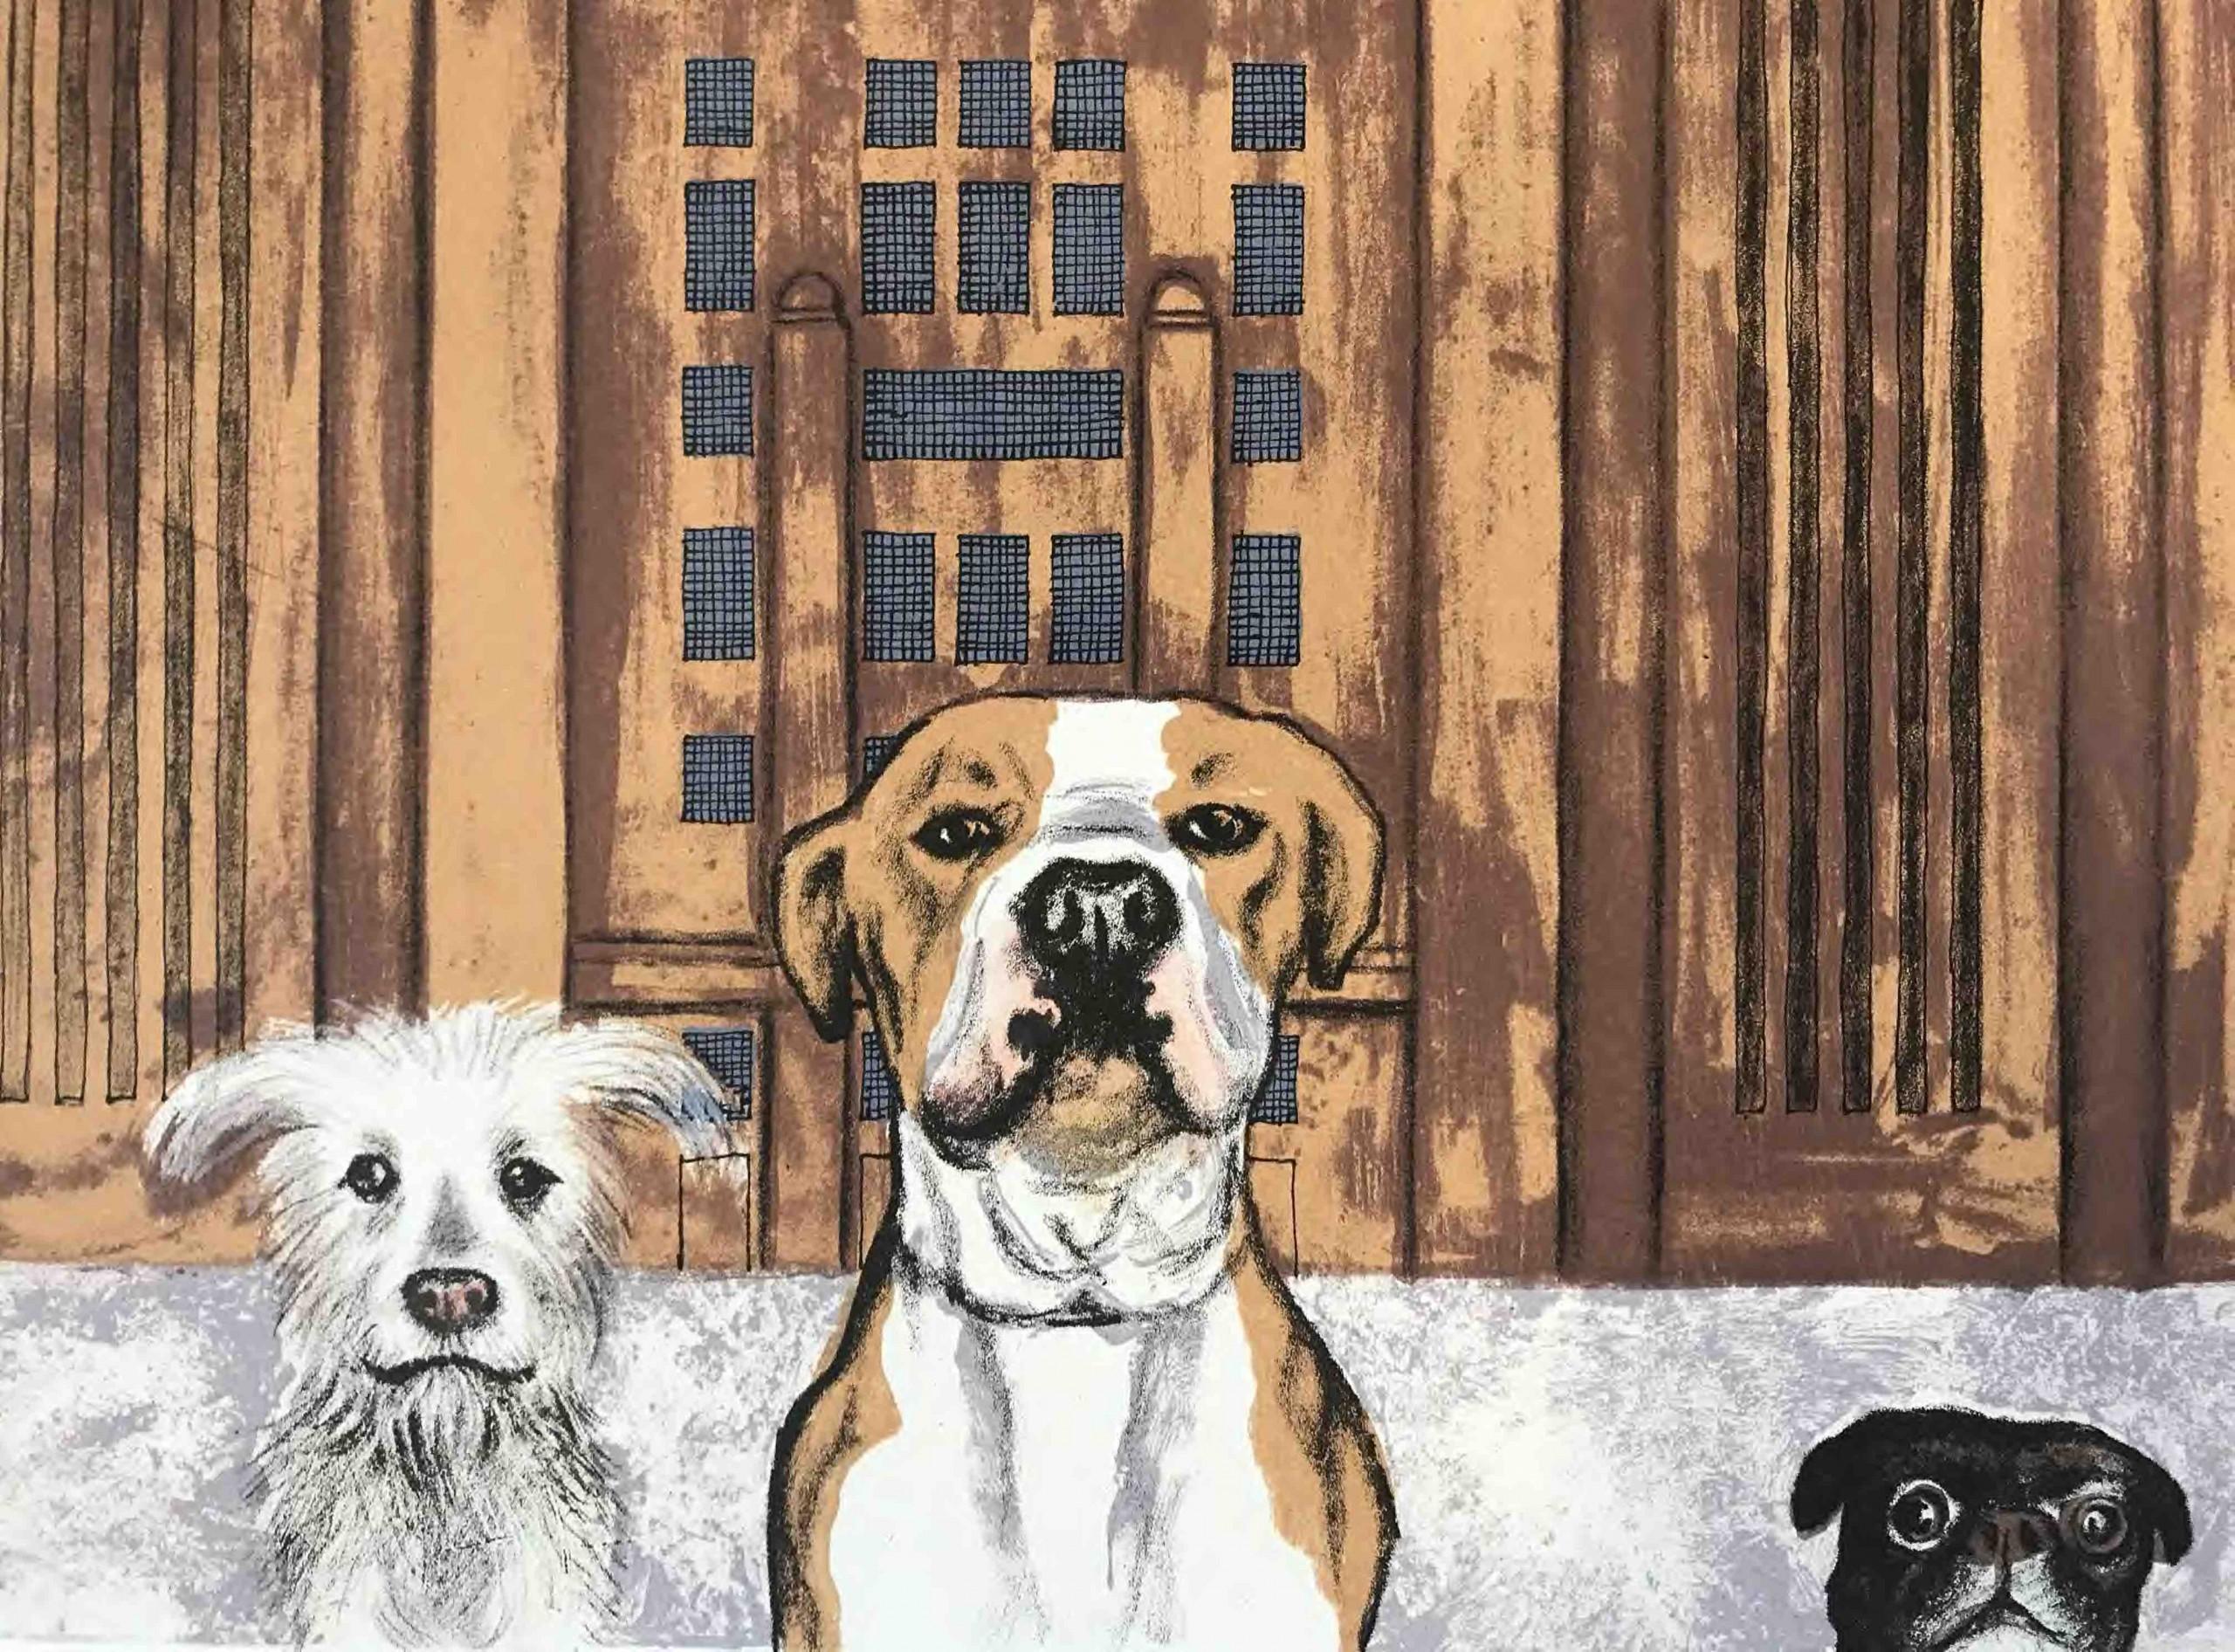 Wes Anderson's Dogs - Battersea Power Station by Artist Mychael Barratt is a limited edition print. This humorous scene depicts three dogs looking over the edge of the picture, with a floating pig flying in between the pipes of the power